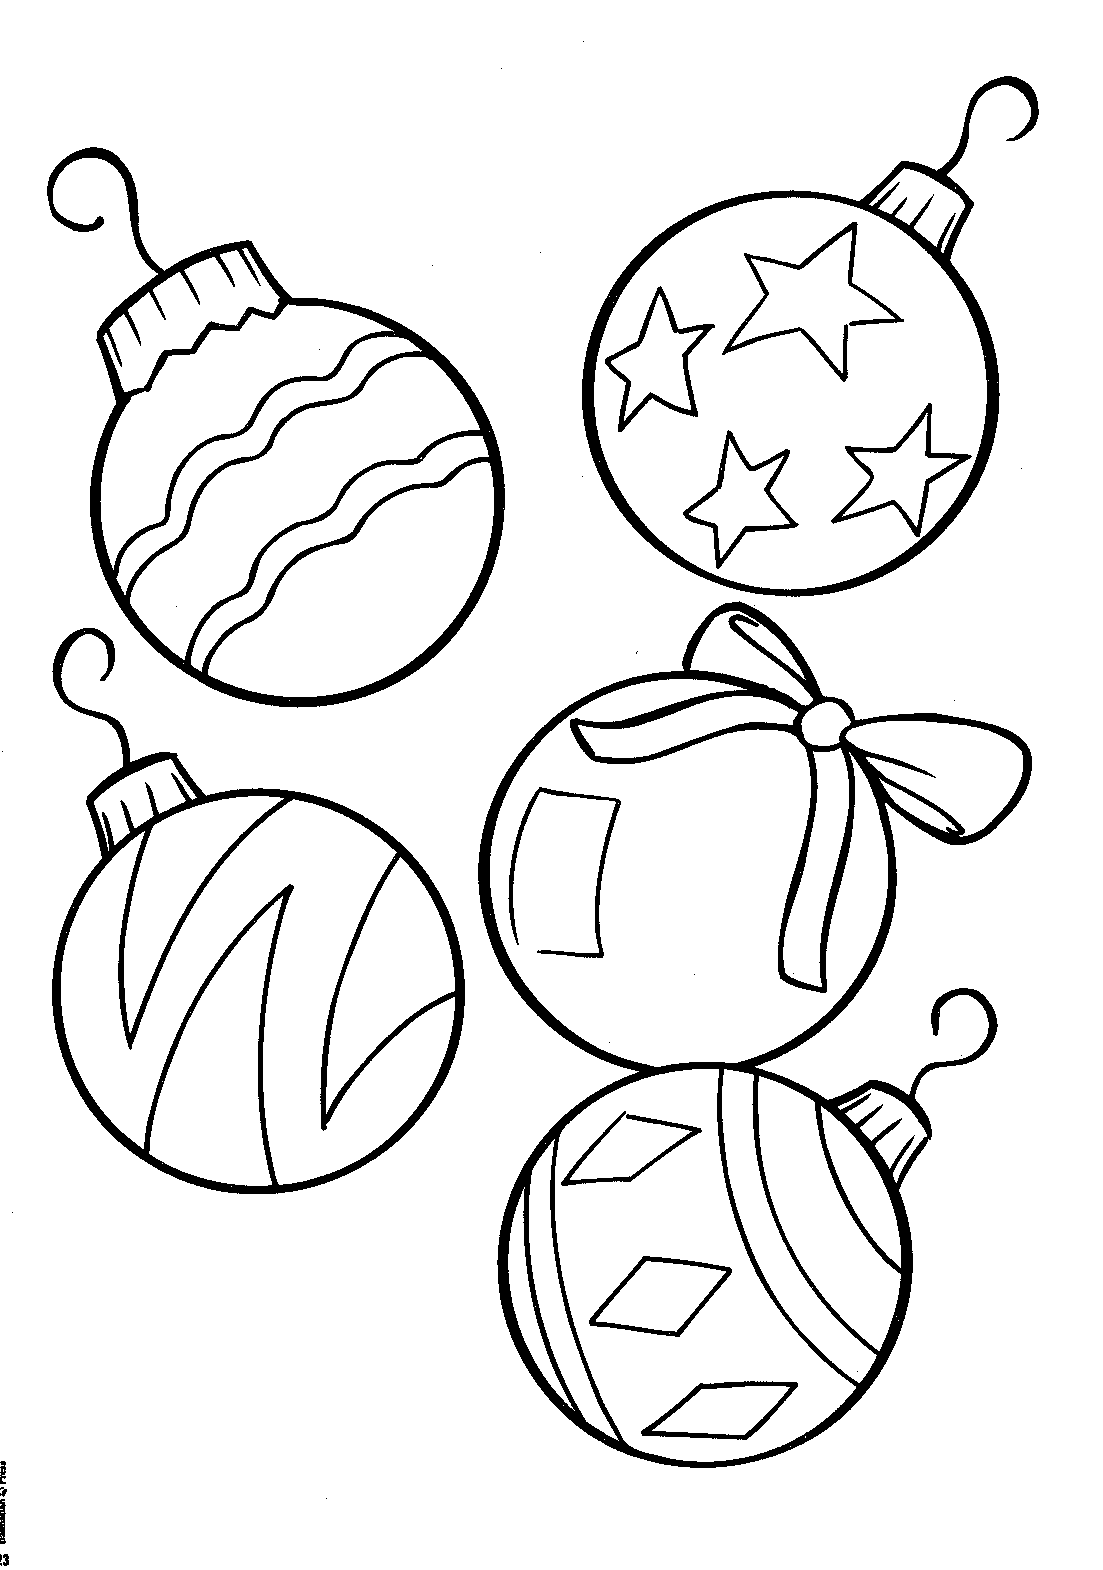 ornaments coloring pages christmas ornament coloring pages best coloring pages pages coloring ornaments 